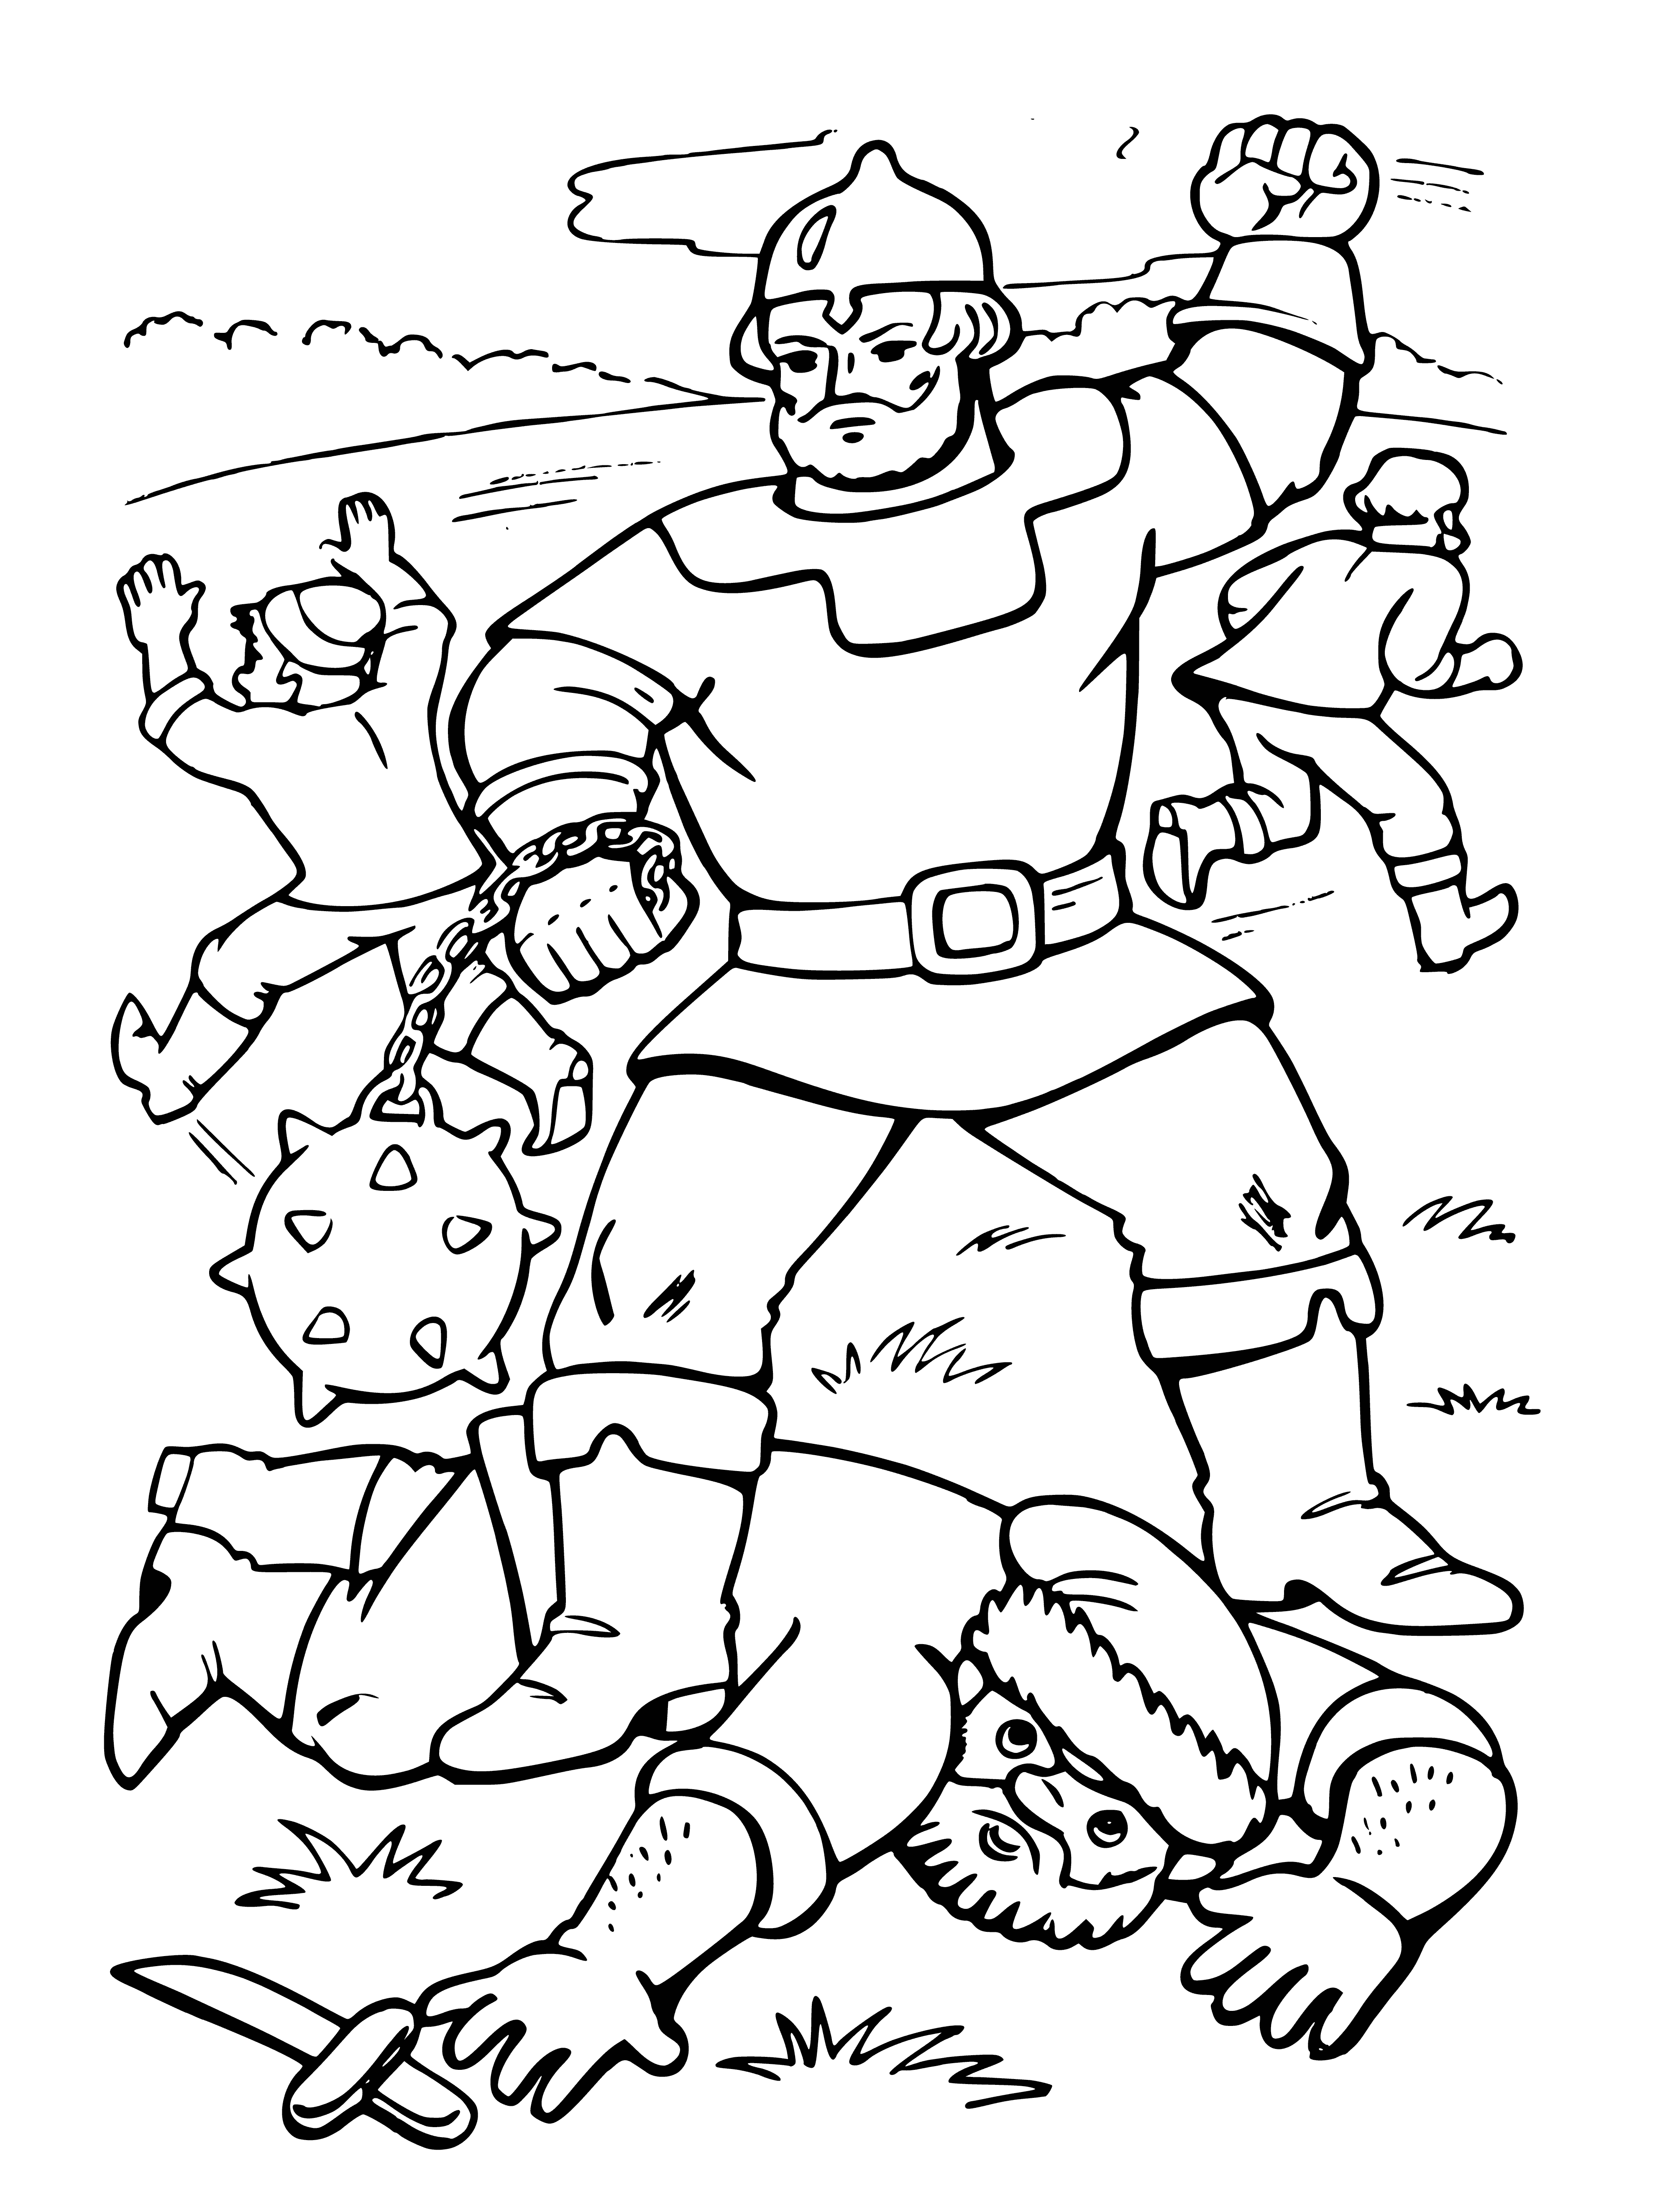 coloring page: Ilya Muromets is a brave Russian folk hero who is known for his strength and sword-fighting prowess, as well as his ability to fly.